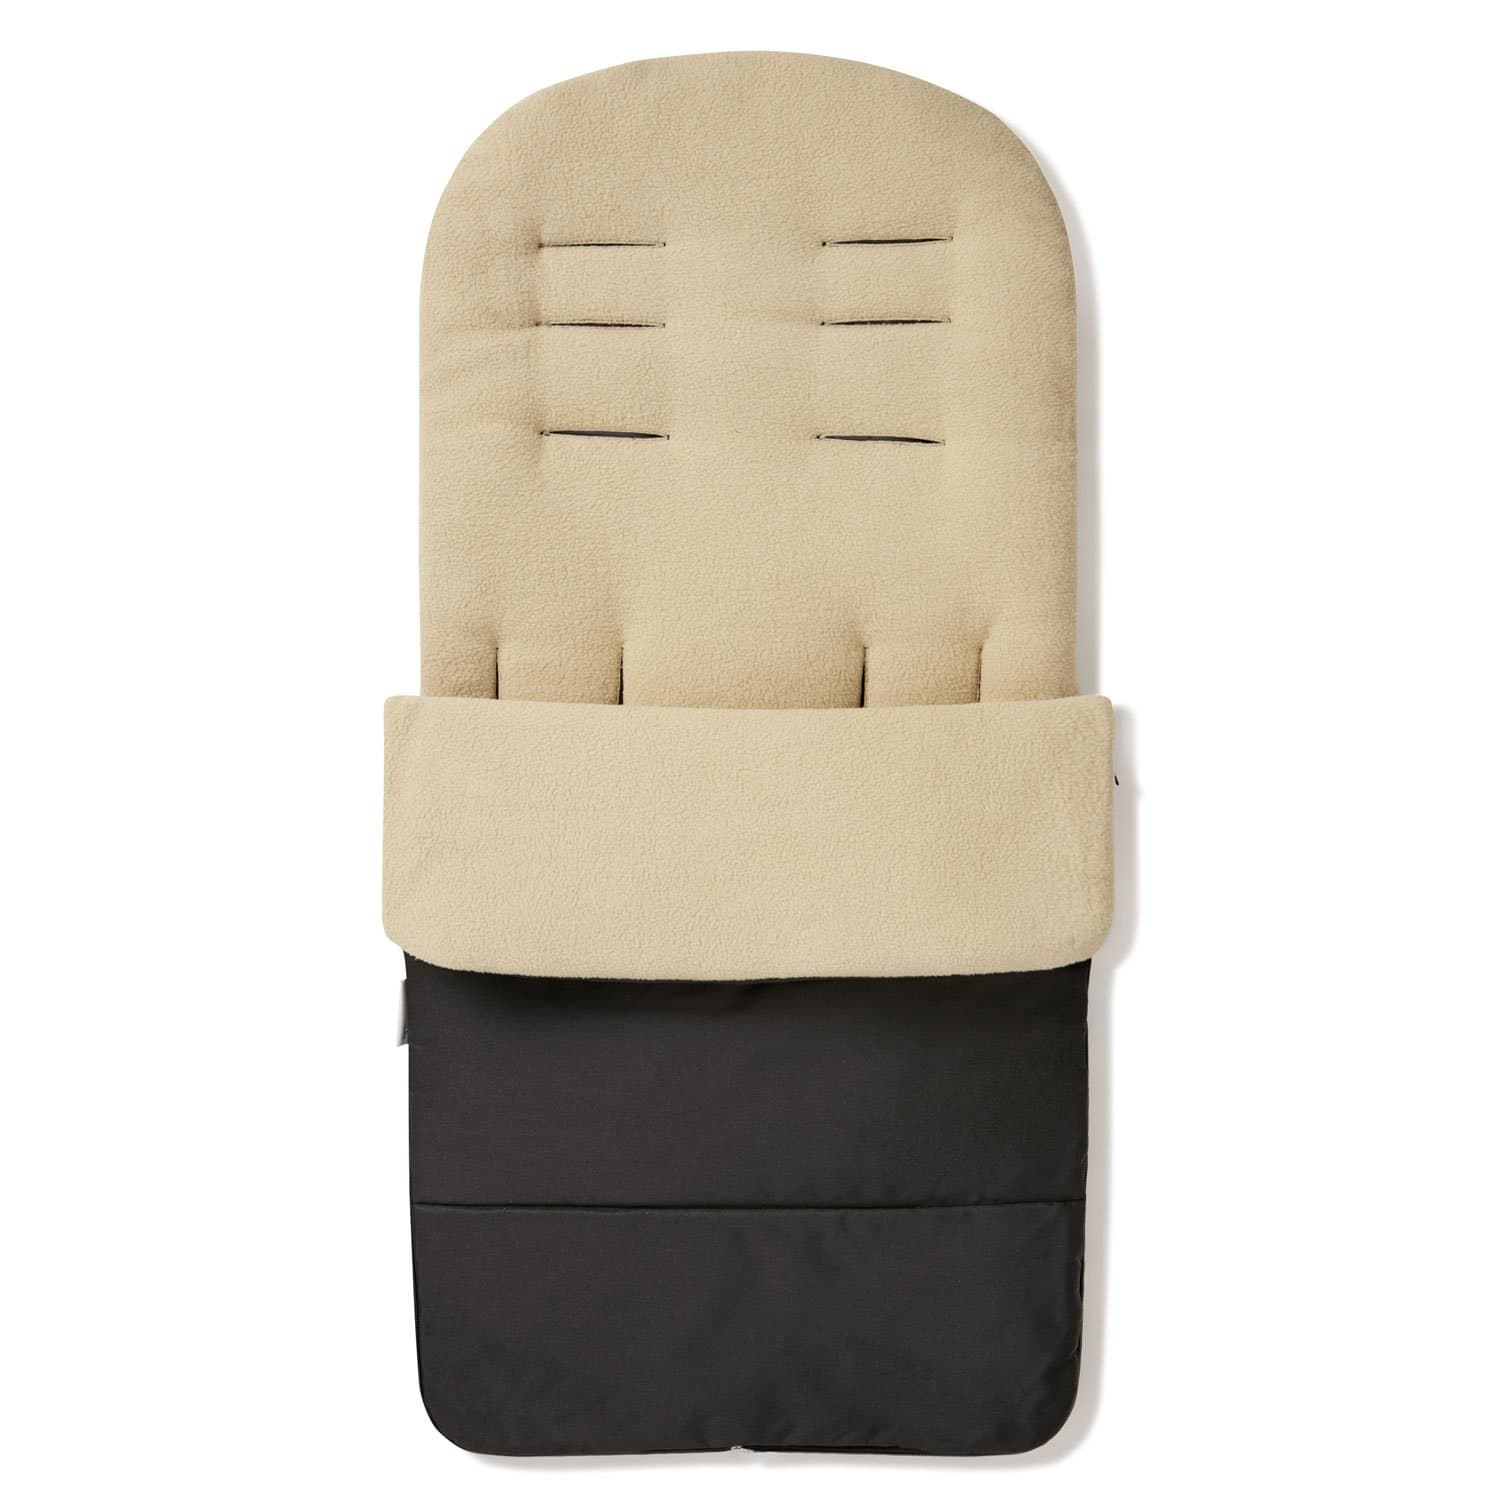 Premium Footmuff / Cosy Toes Compatible with Kiddy - Desert Sand / Fits All Models | For Your Little One